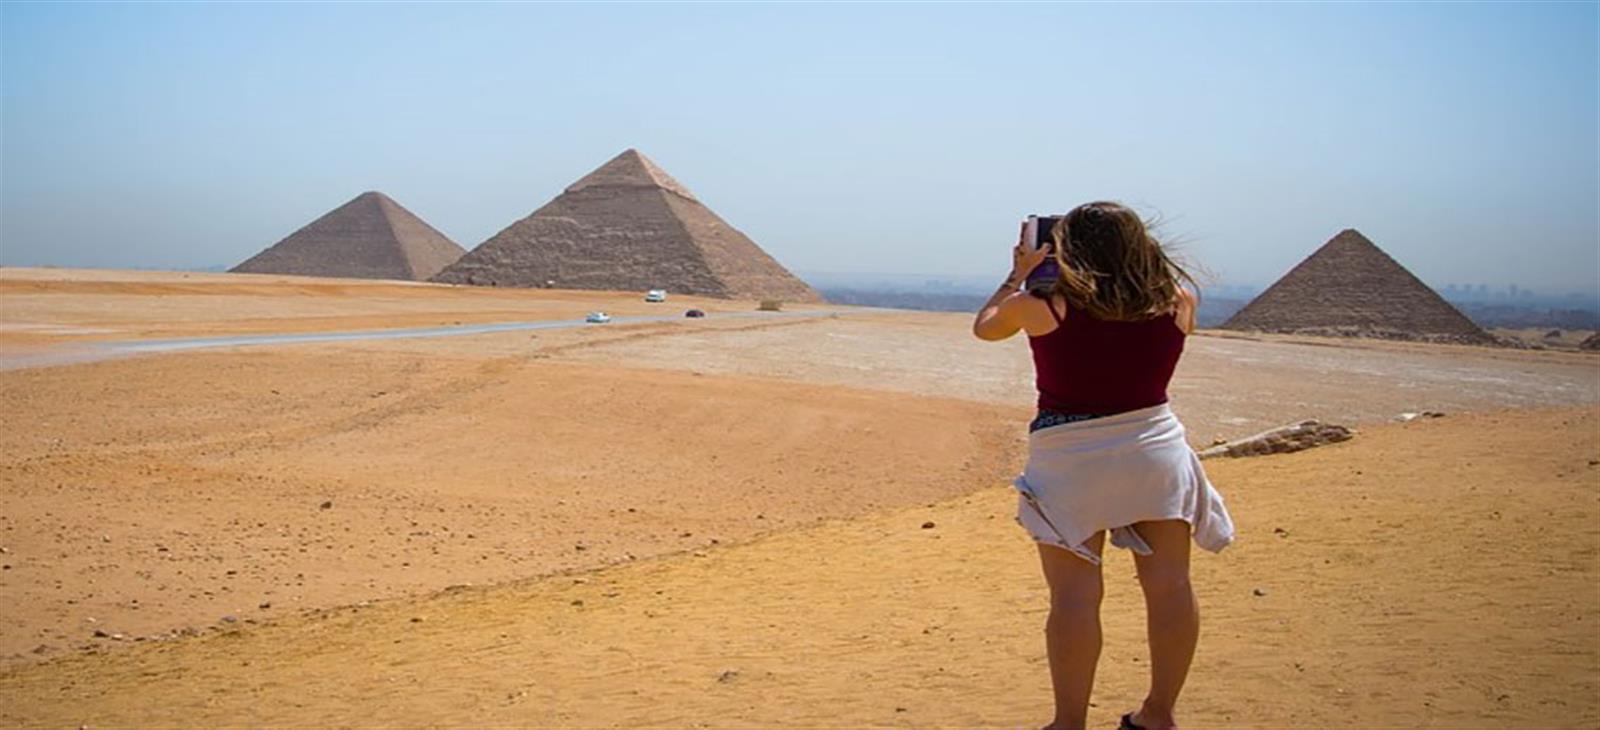 9 day cairo and nile cruises